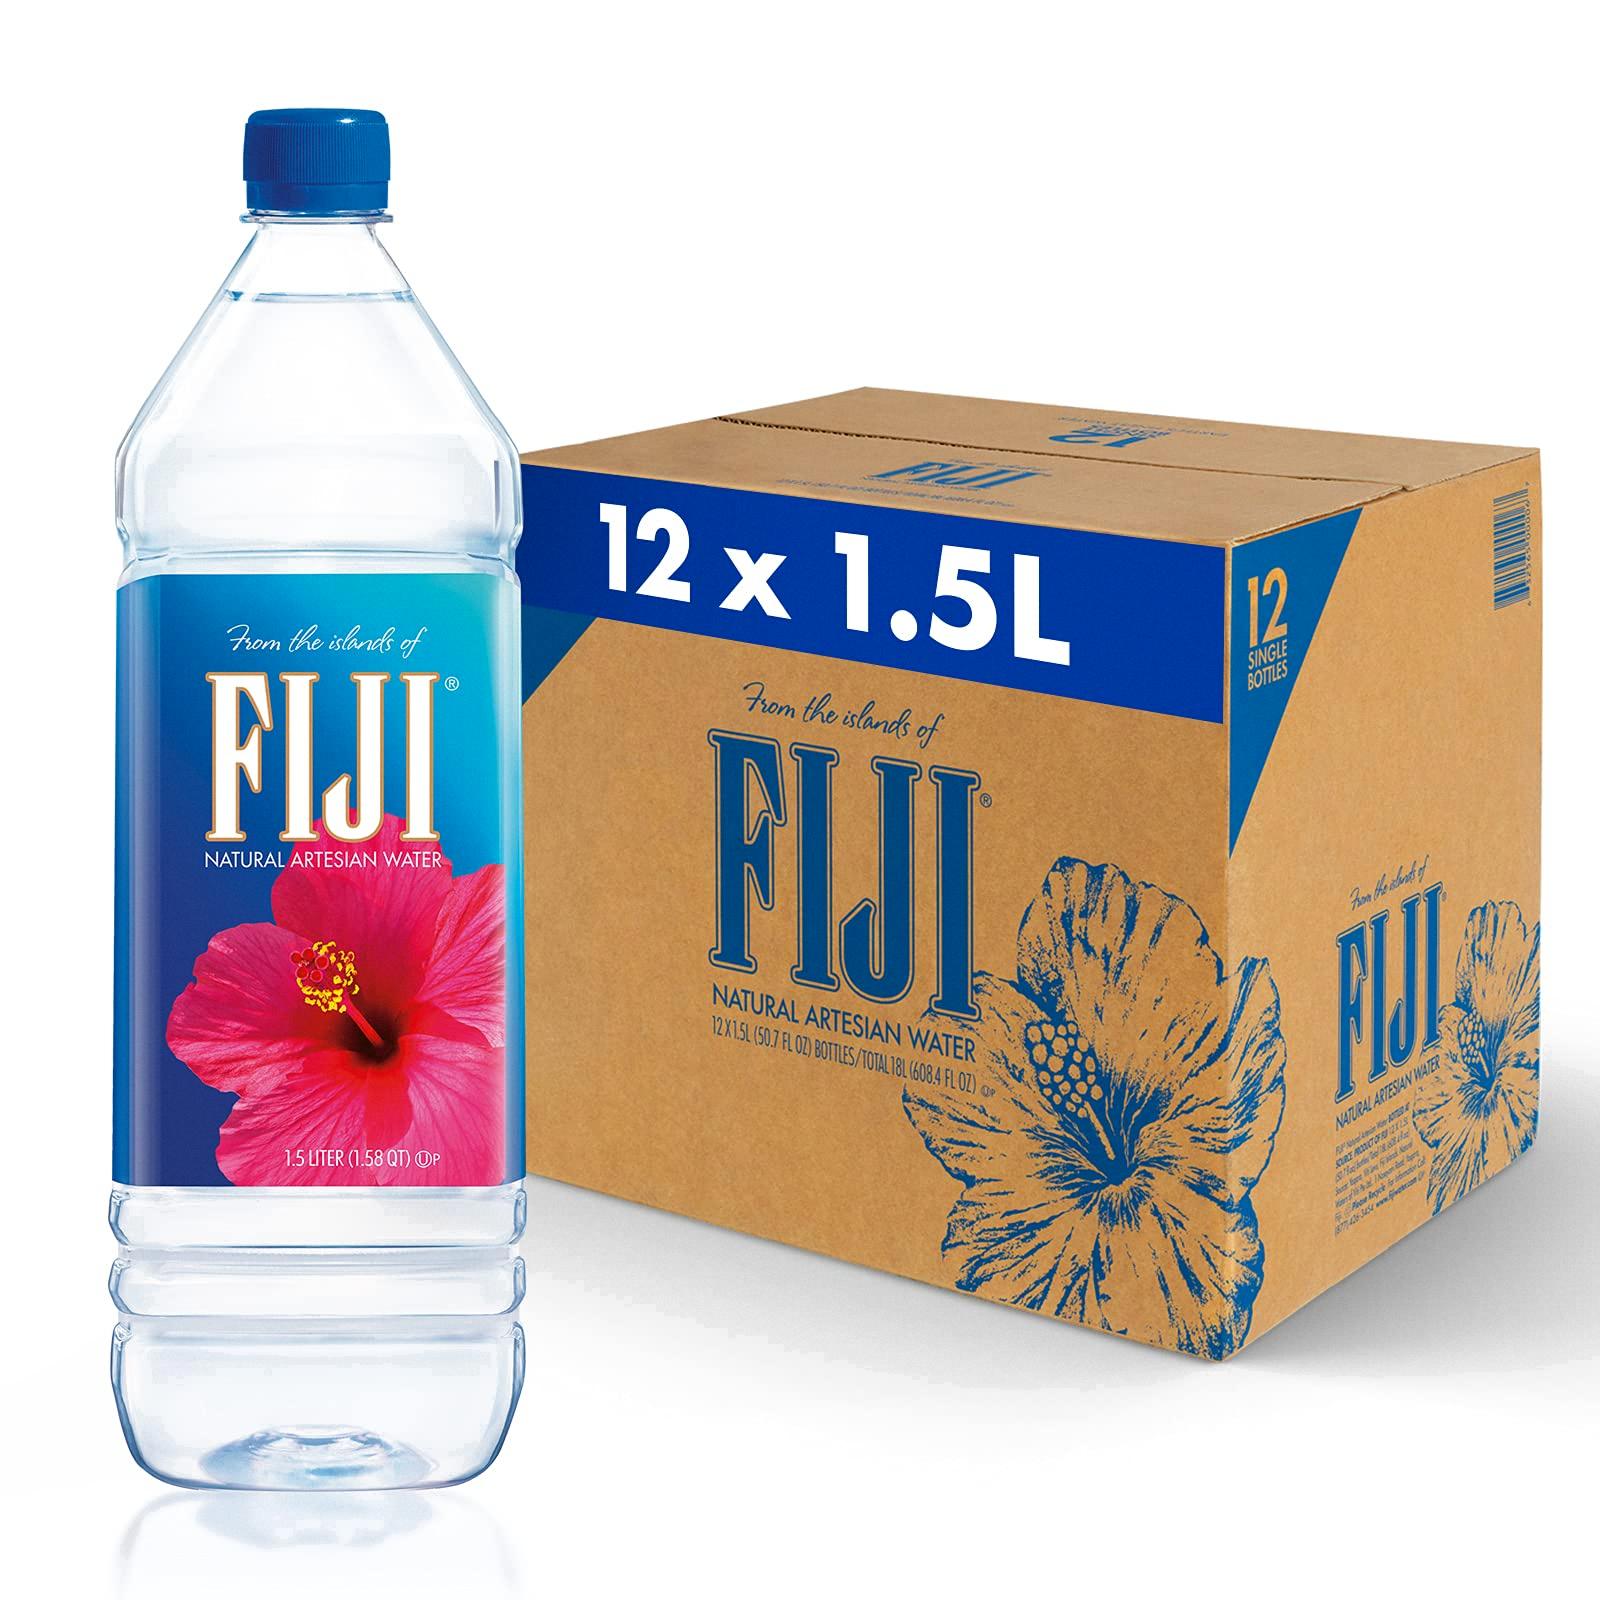 Where Does Fiji Water Come From